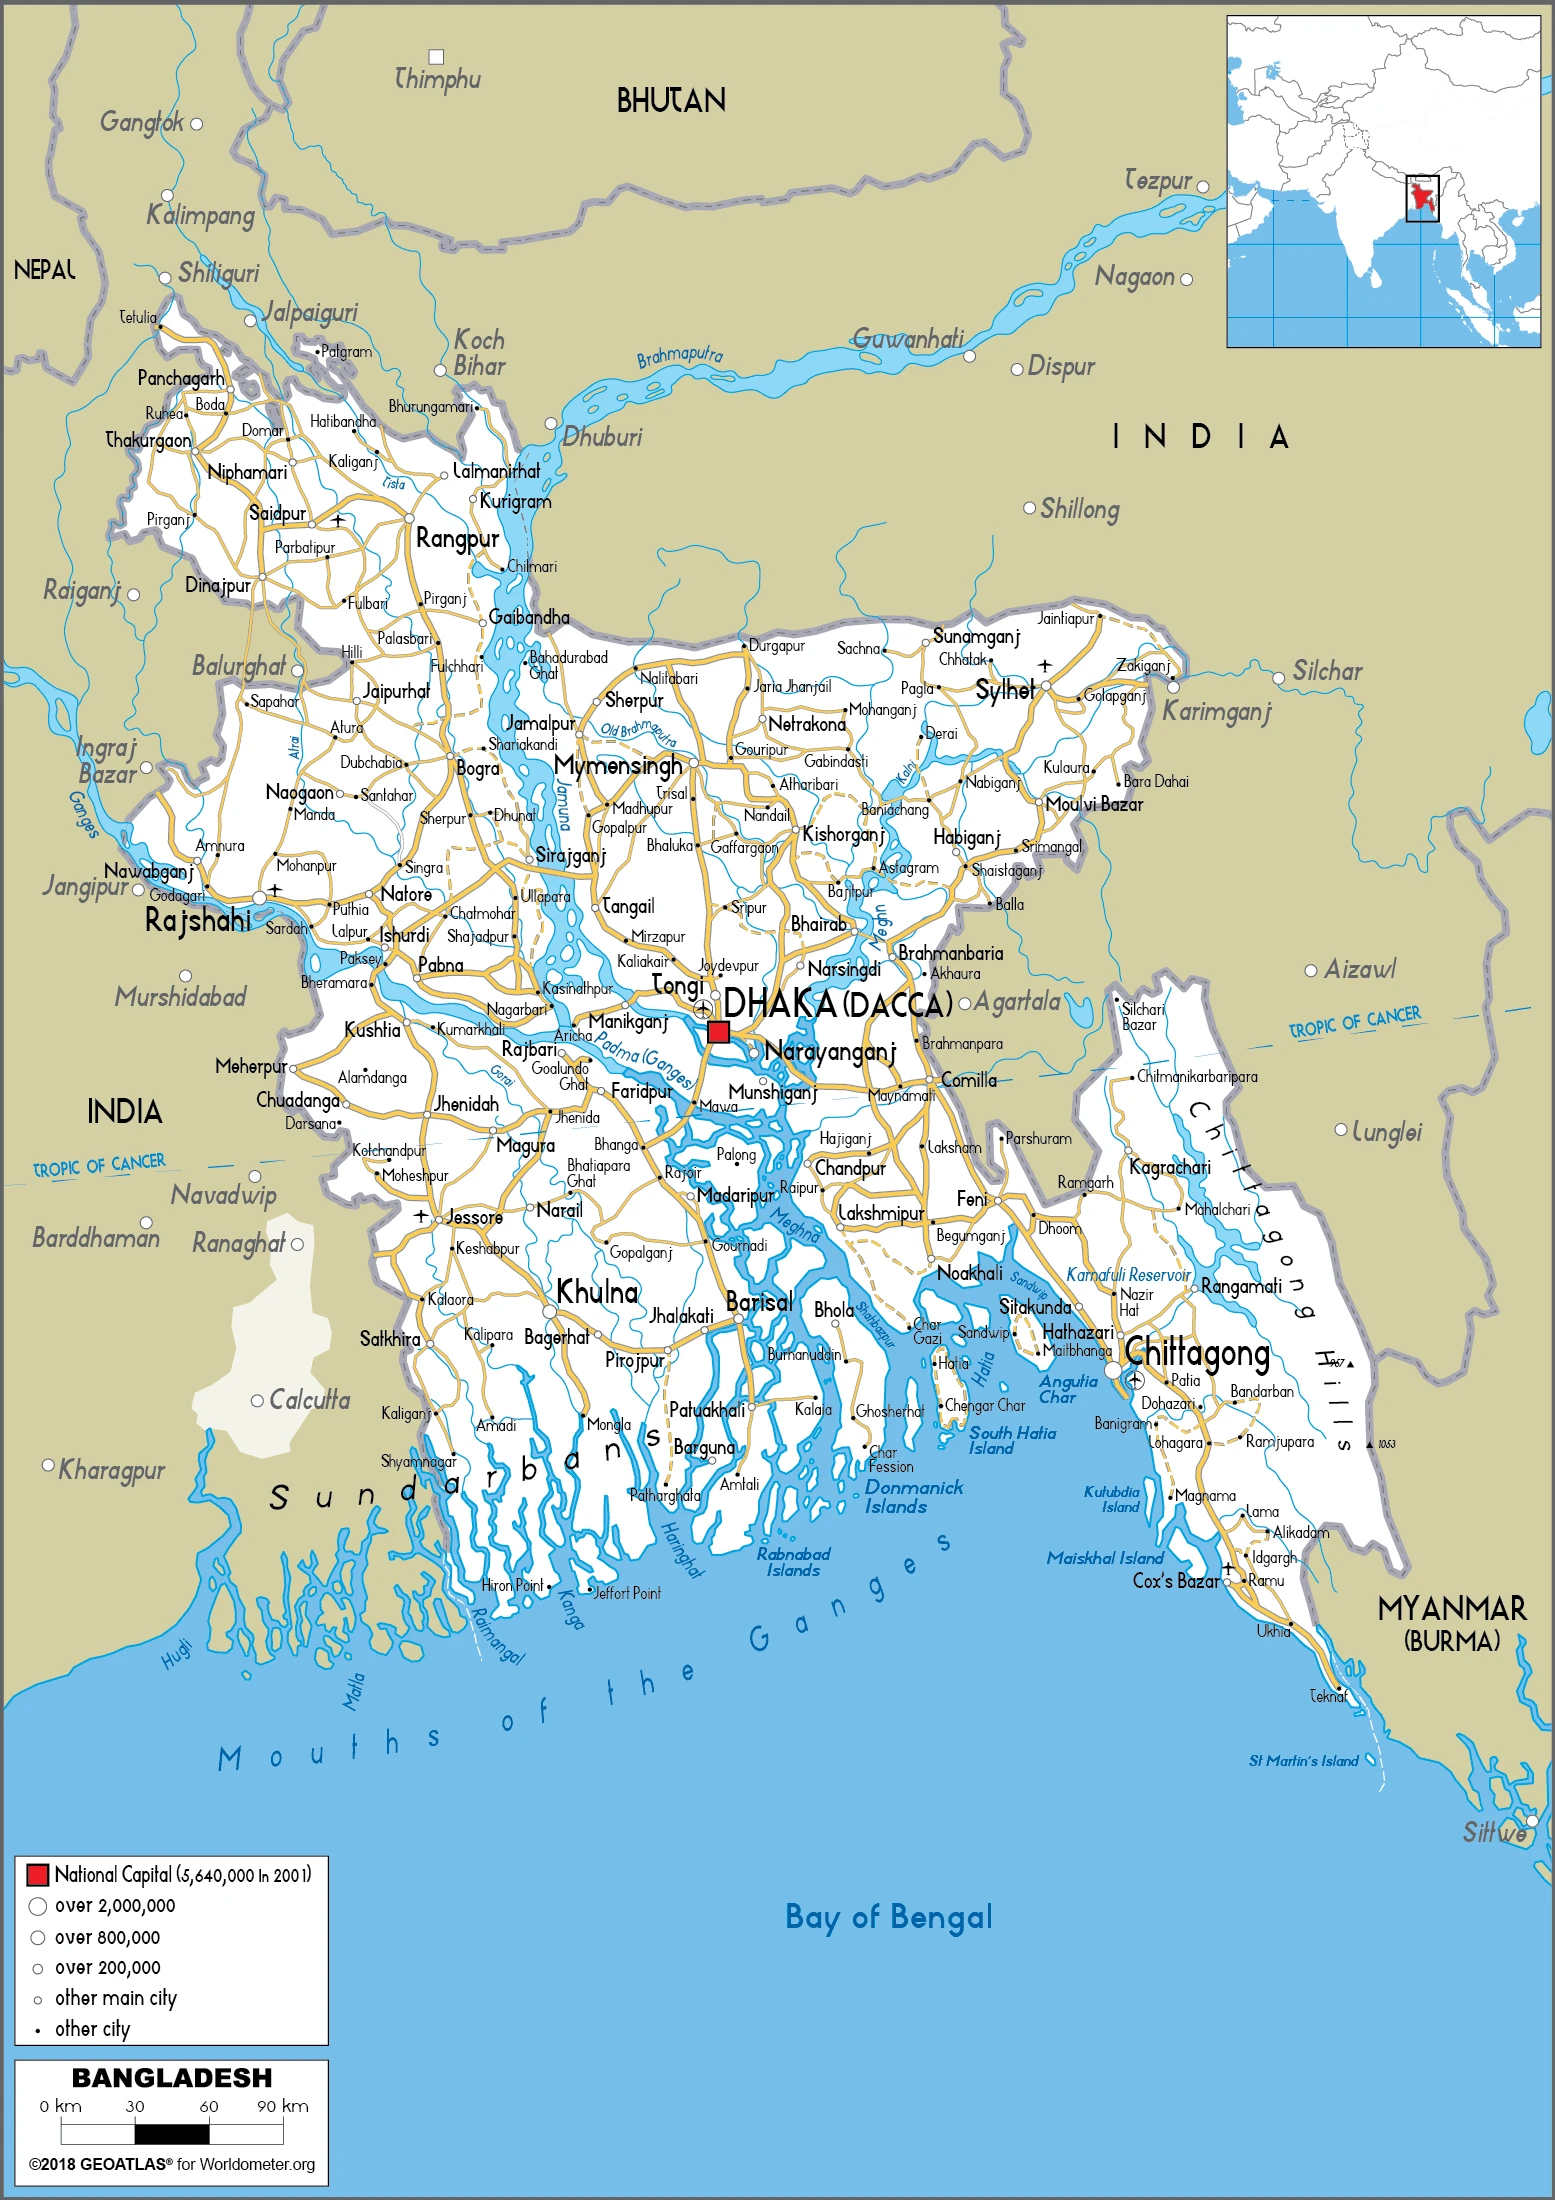 The route plan of the Bangladeshi roadways.